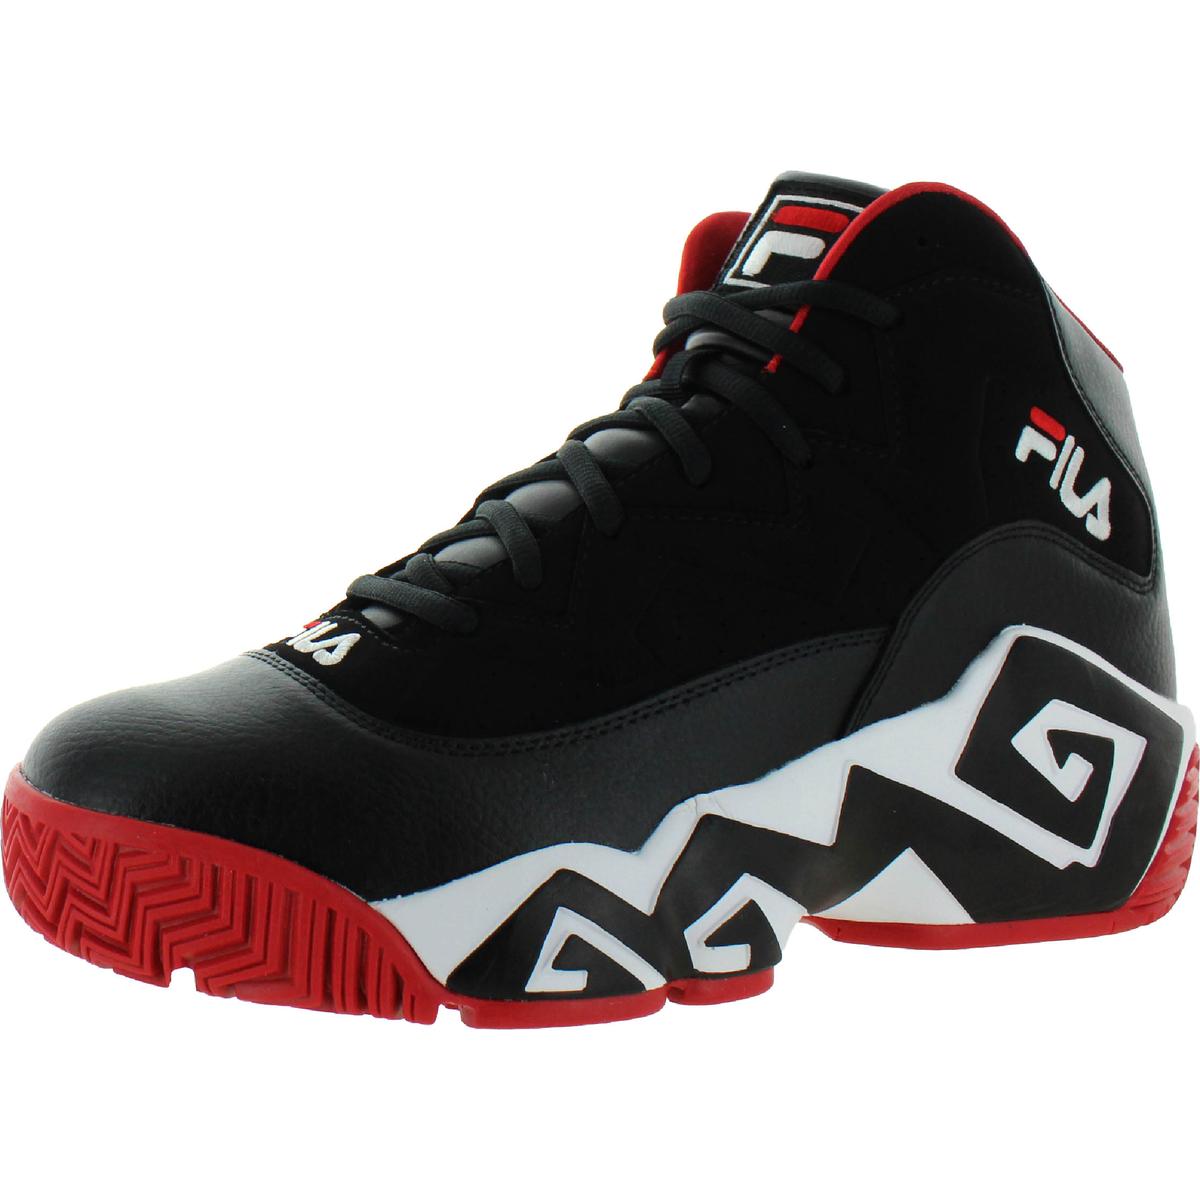  Fila  Mens  MB Black Leather Basketball  Shoes  Sneakers  11 5 